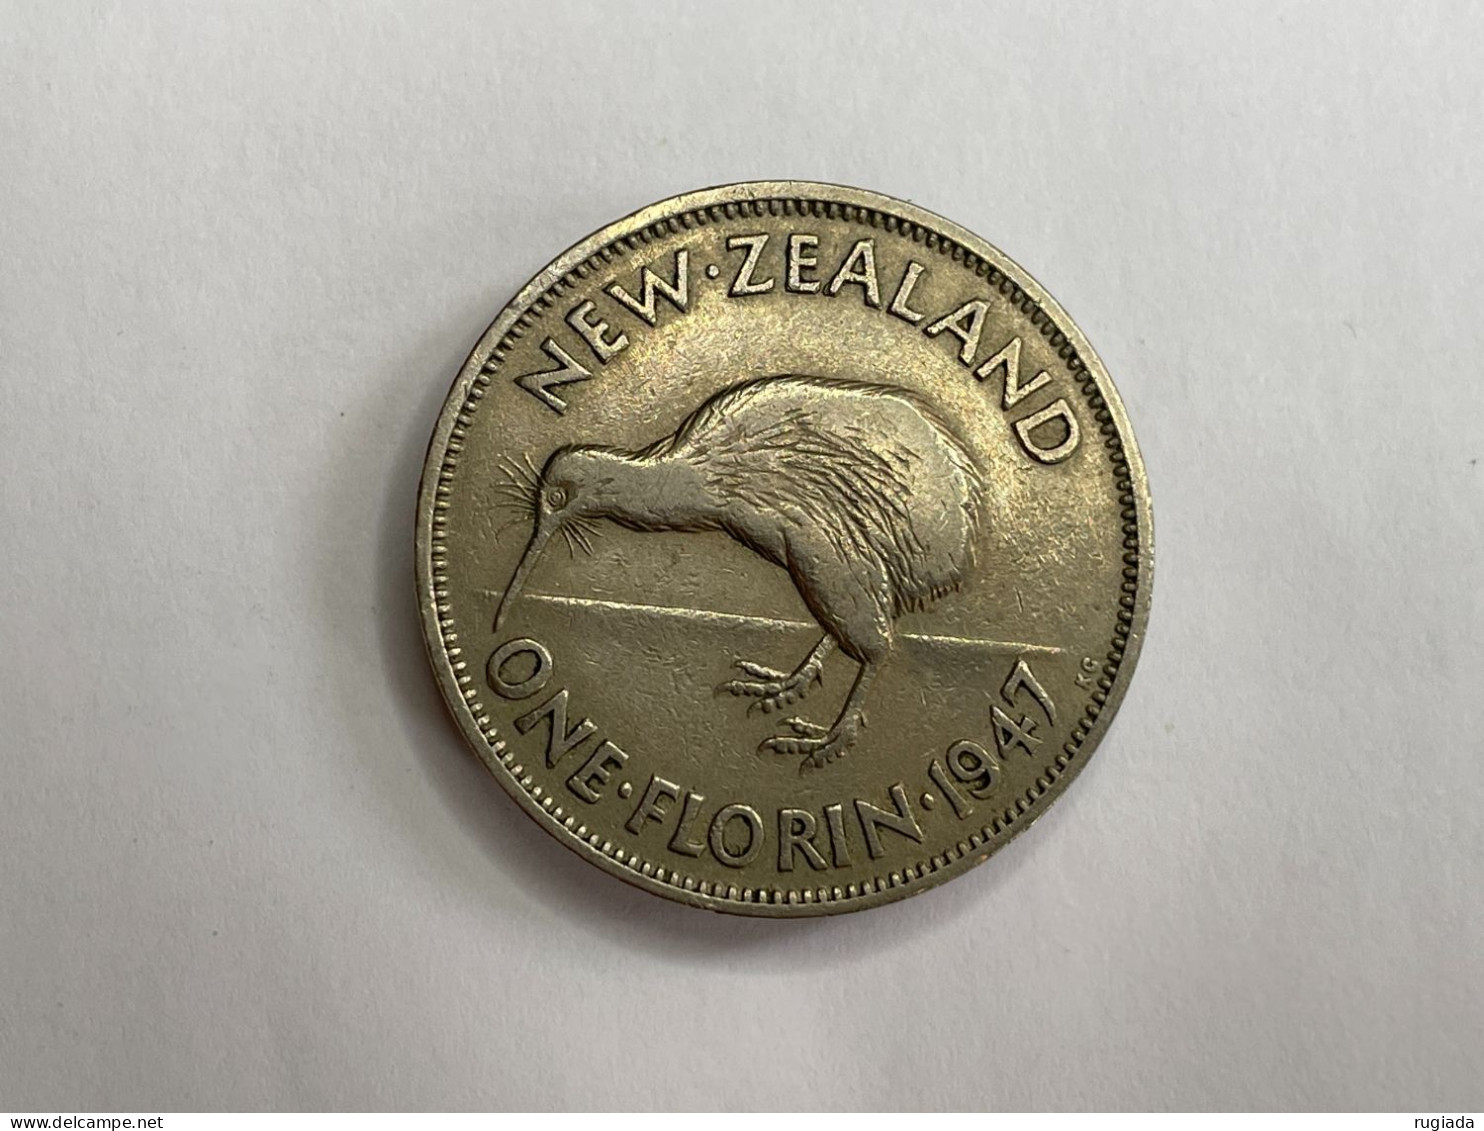 1947 New Zealand Florin/2 Shilling, Copper Nickel Coin, VF Very Fine - Neuseeland